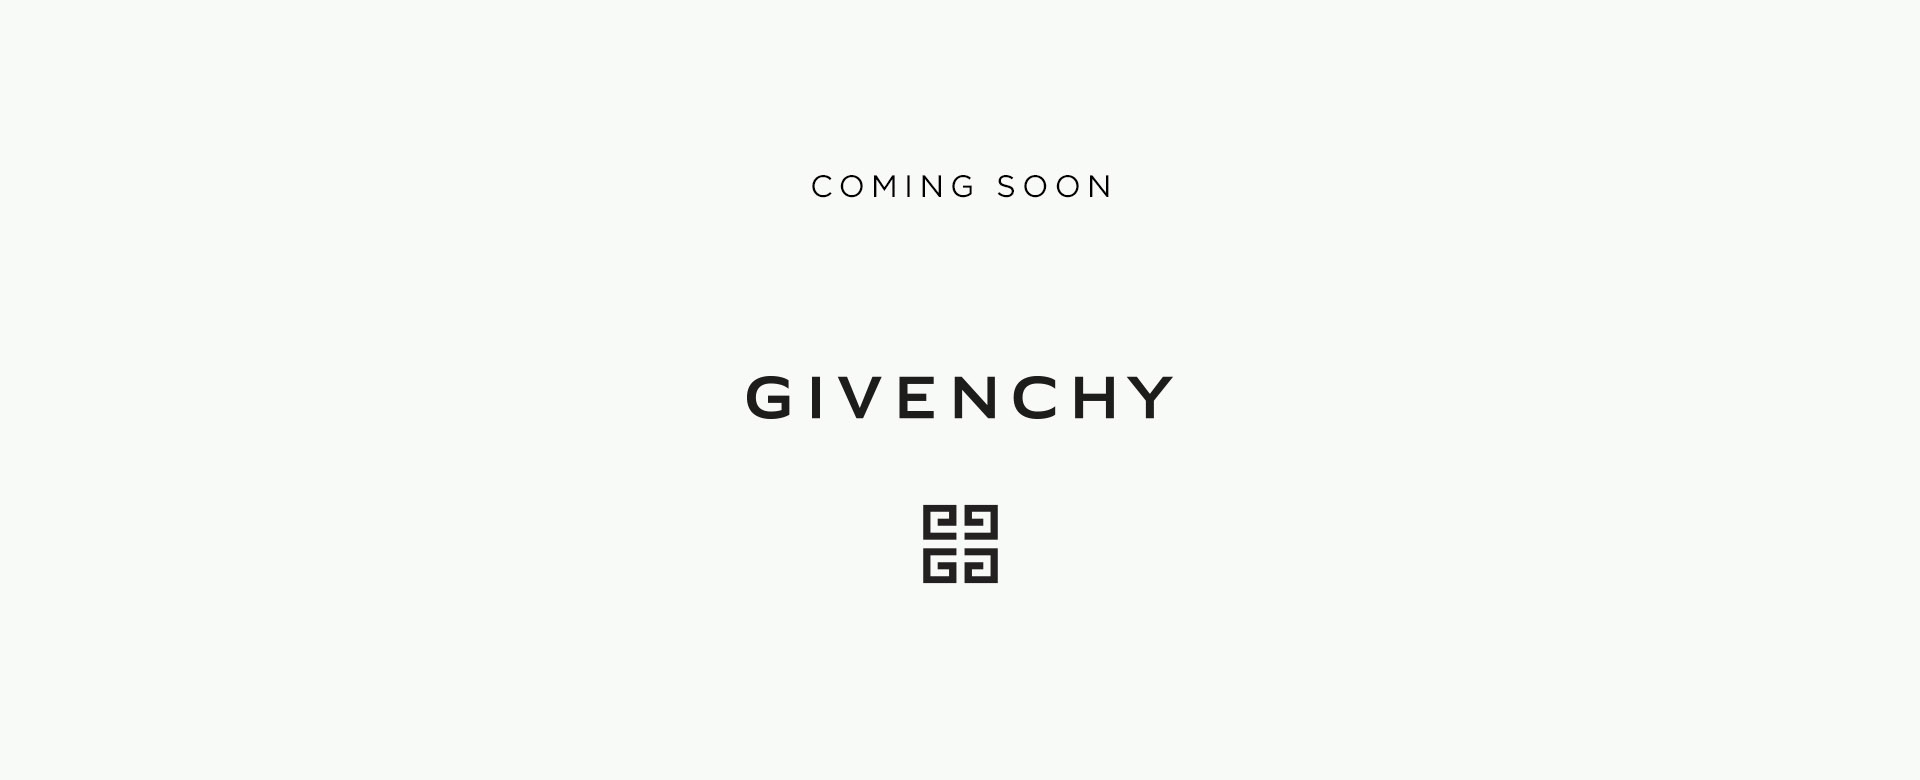 Givenchy llega a Kids around 